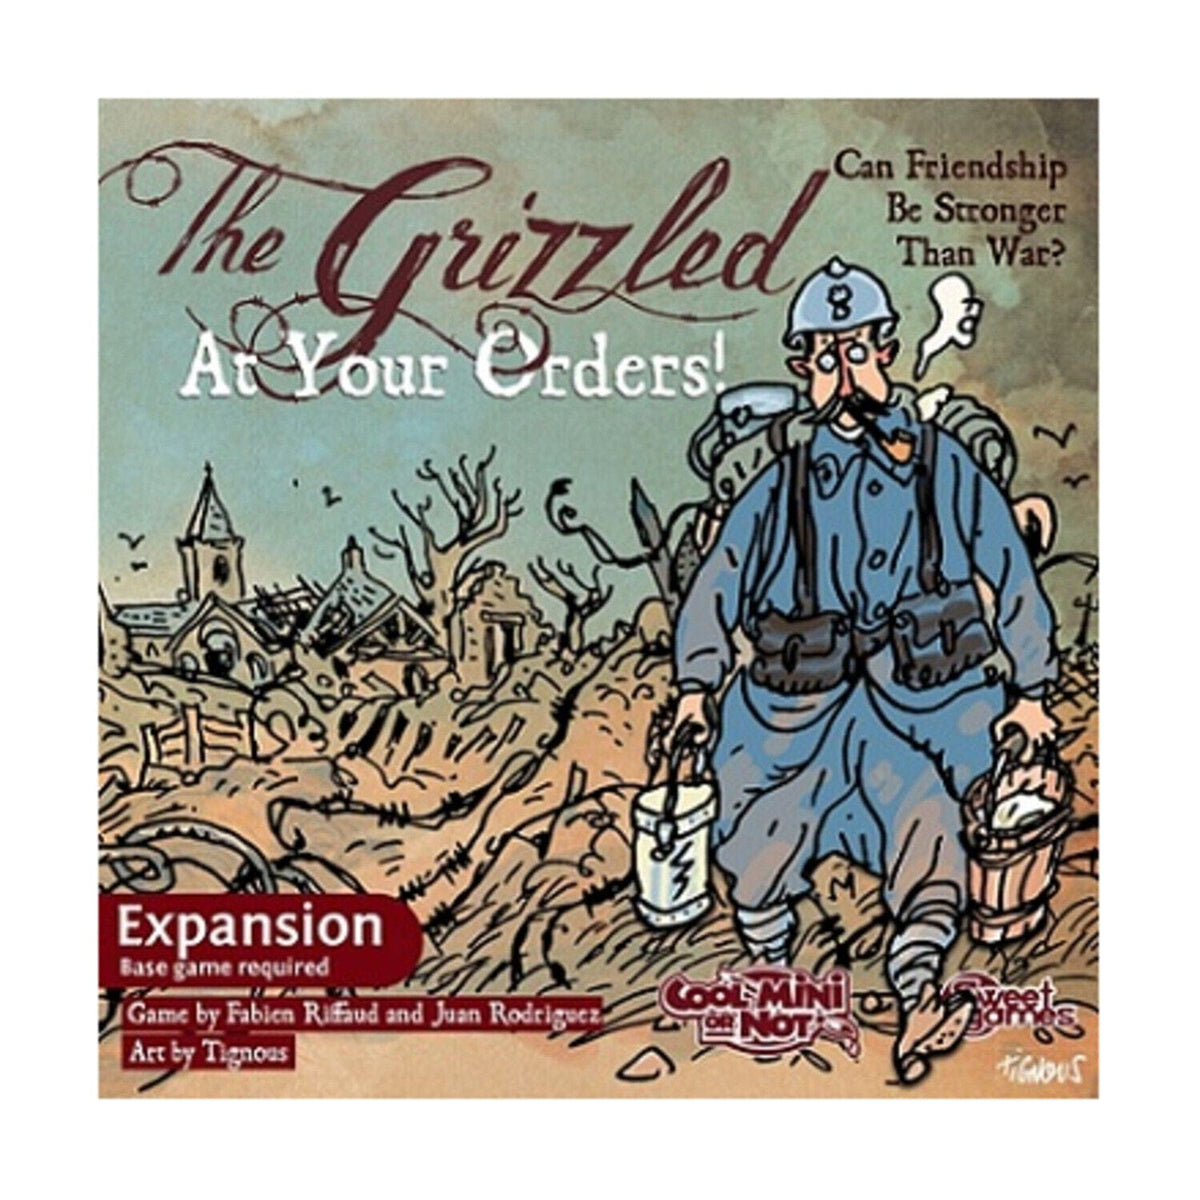 The Grizzled: At Your Orders! Expansion - Third Eye